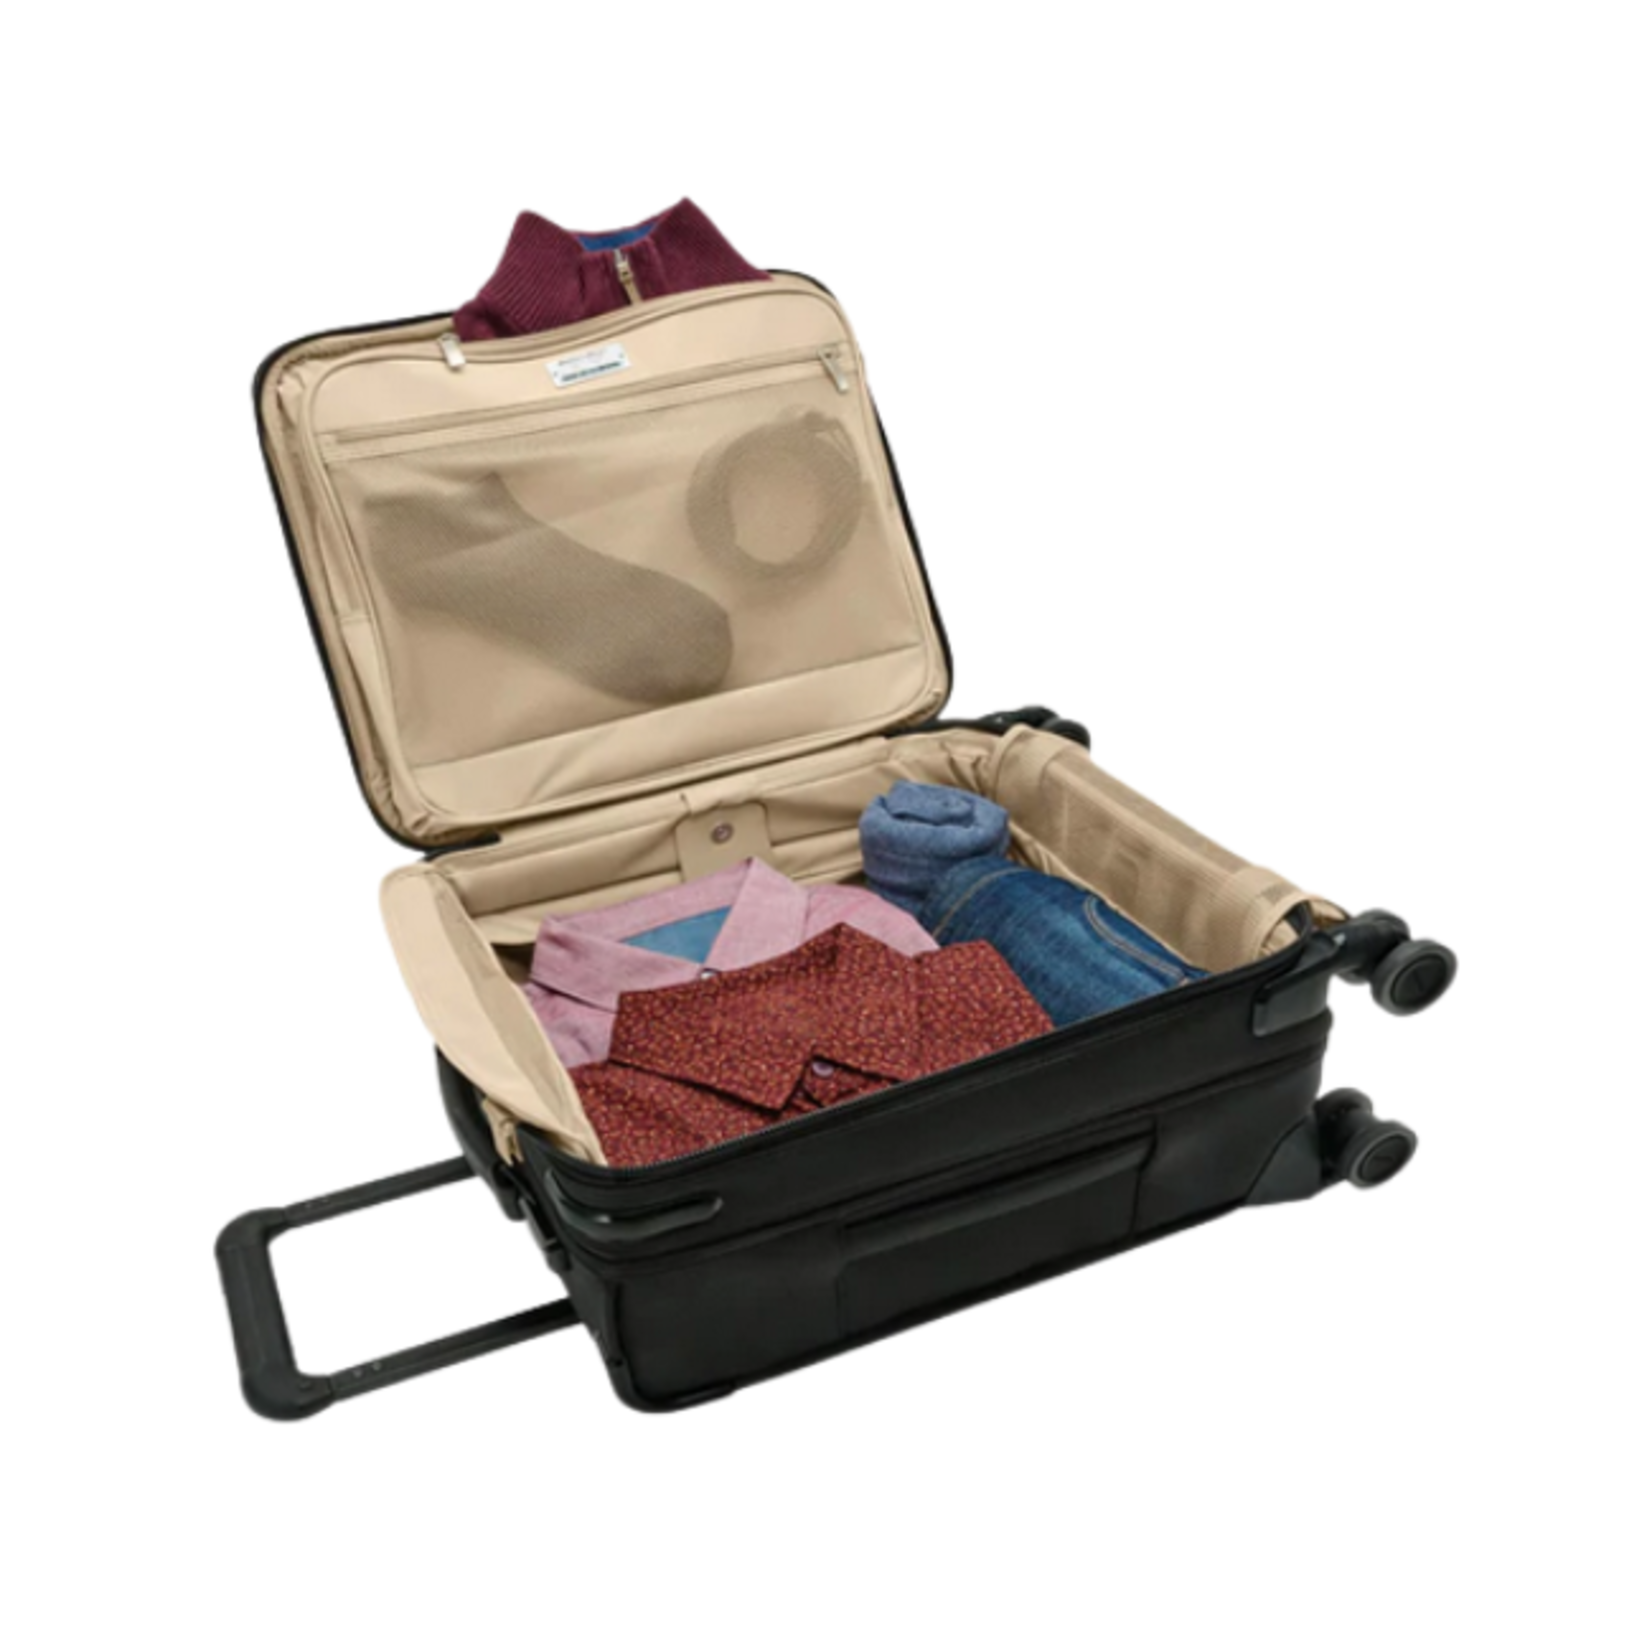 BRIGGS & RILEY BASELINE COMPACT CARRY-ON SPINNER